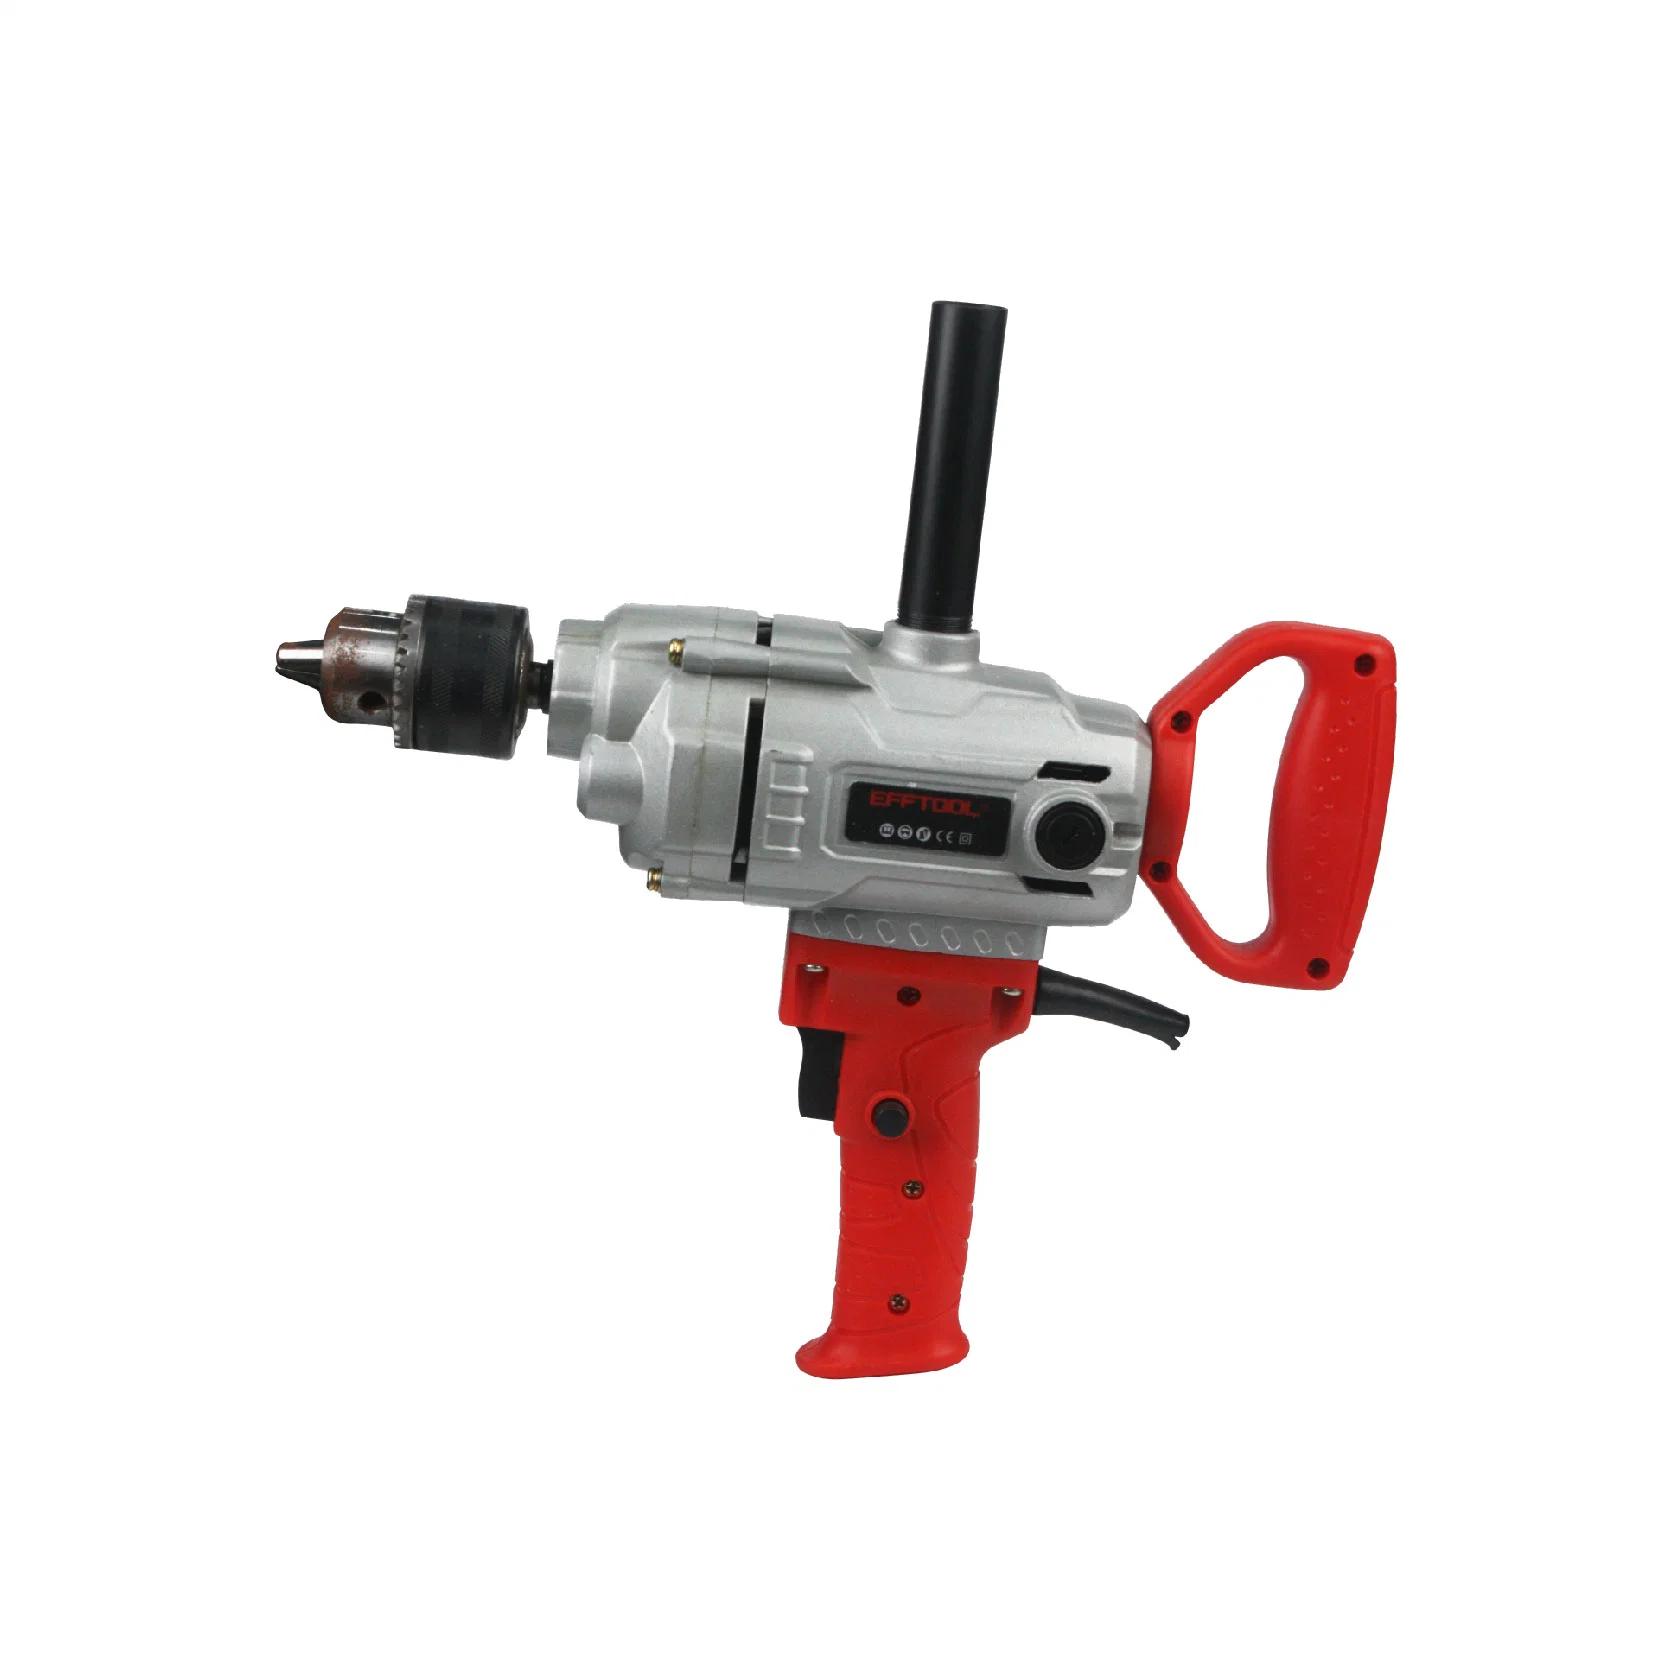 Wholesale Power Tools Light and Practical Portable Professional Power Tools Drill